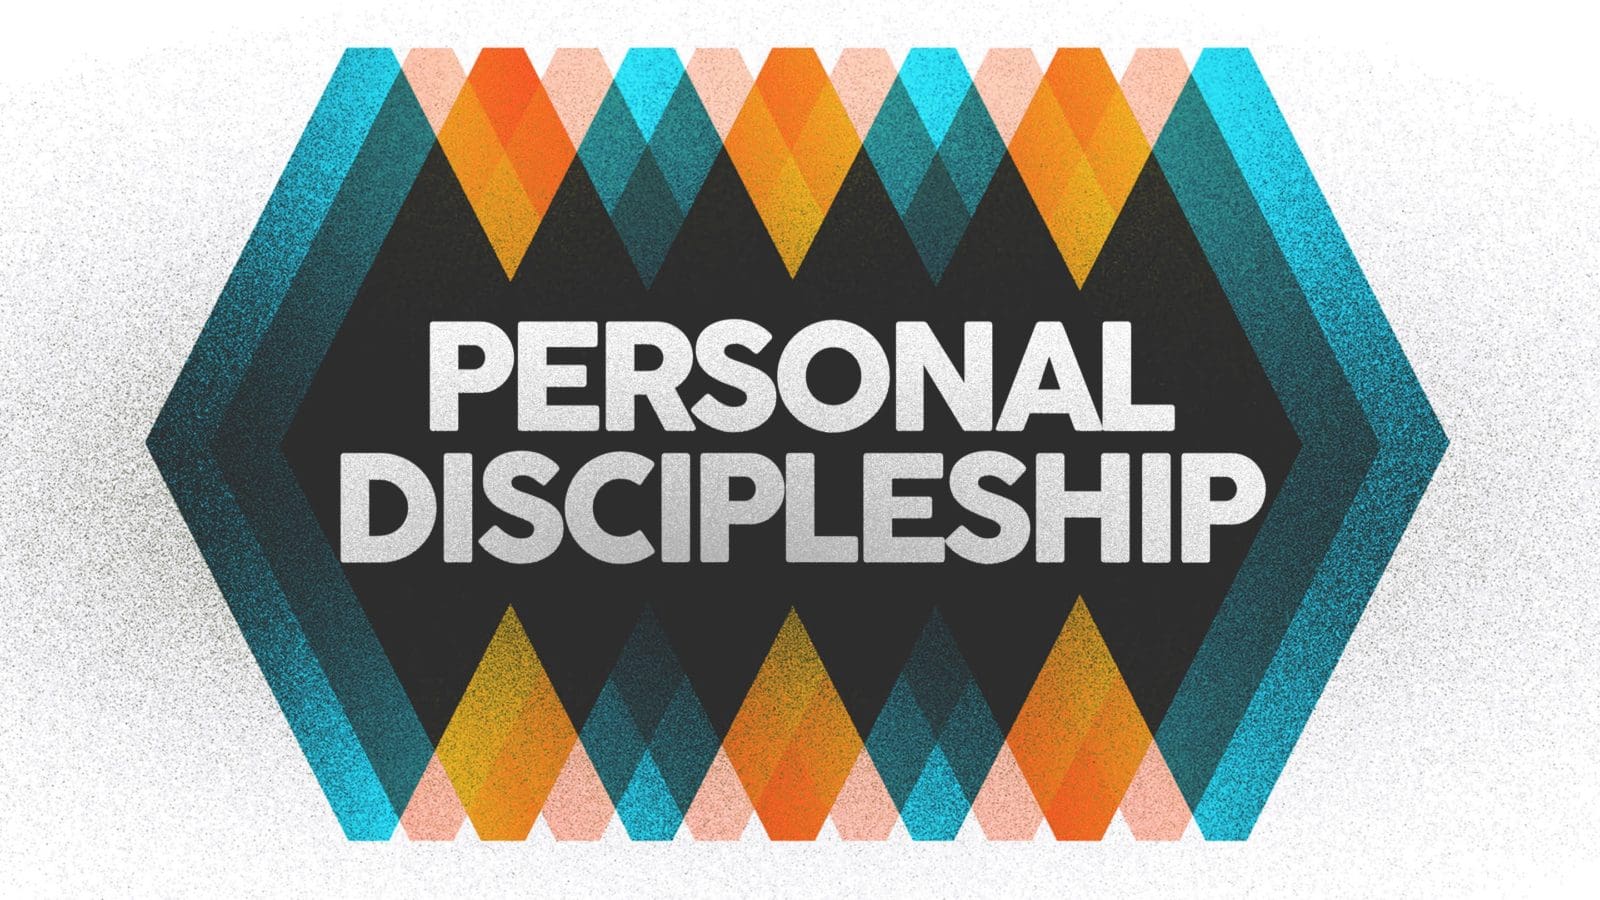 Discipleship in the New Testament